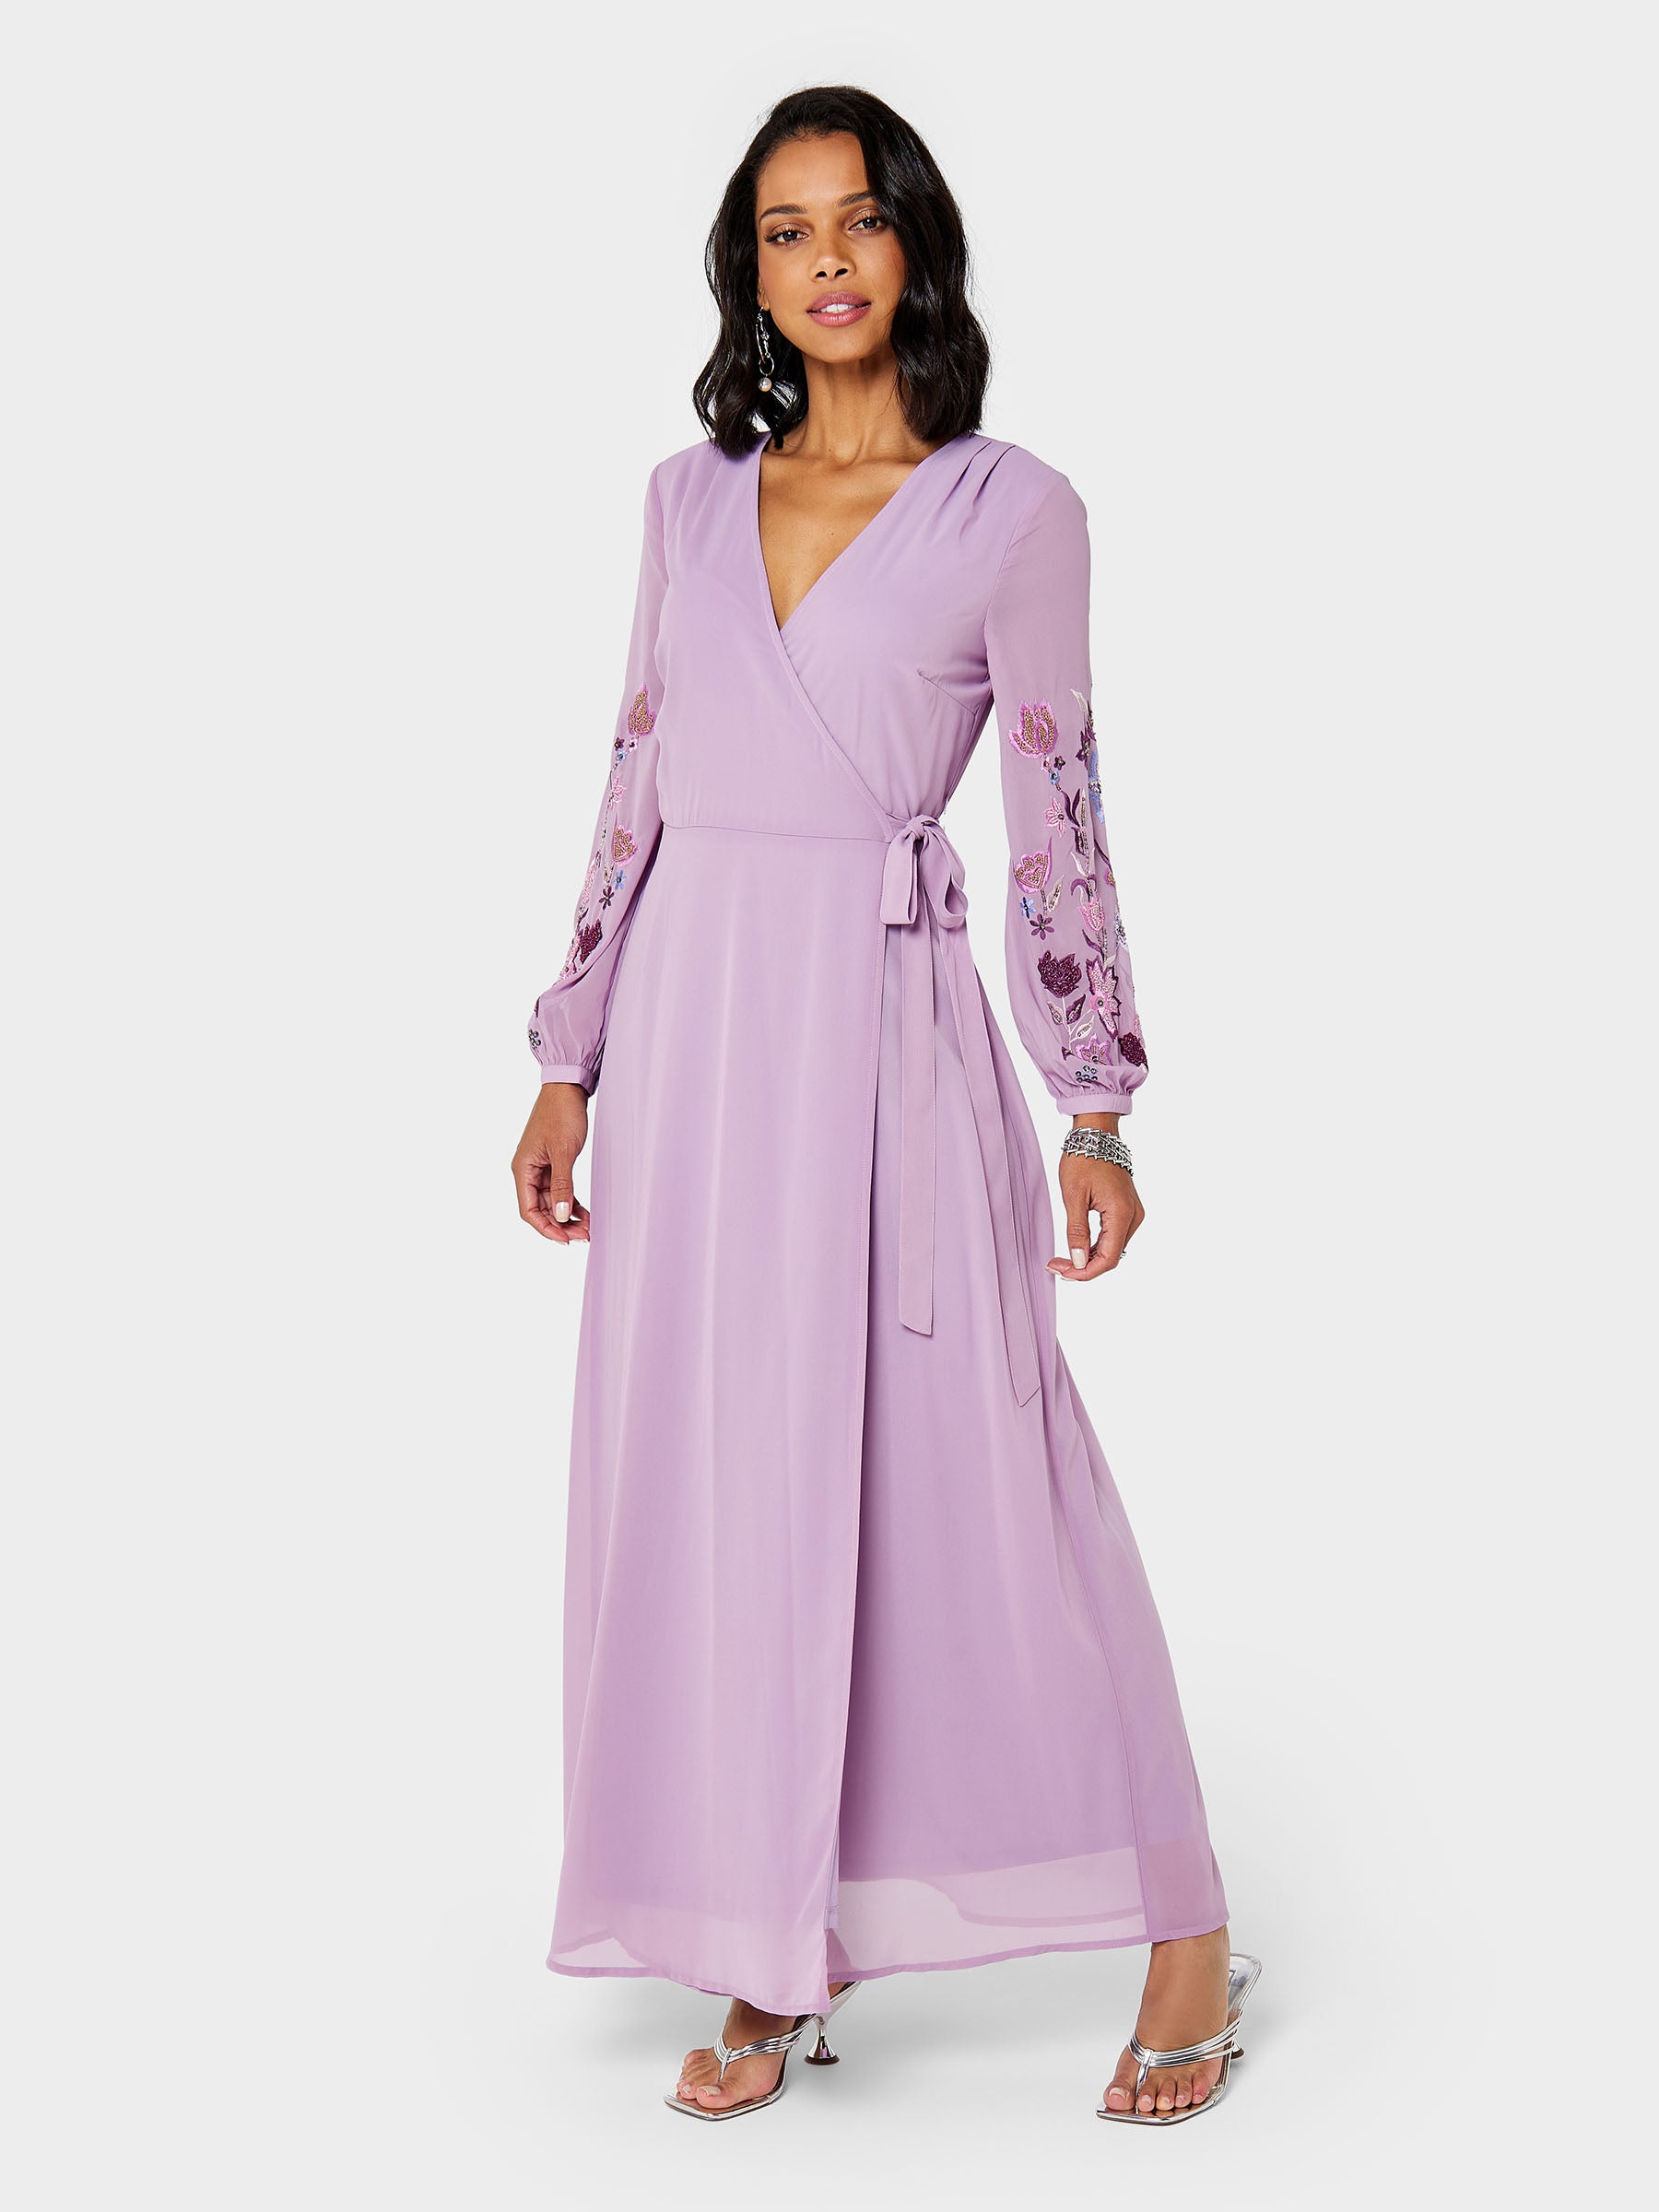 10 Fall Dresses on Sale for Under $40 During October Prime Day